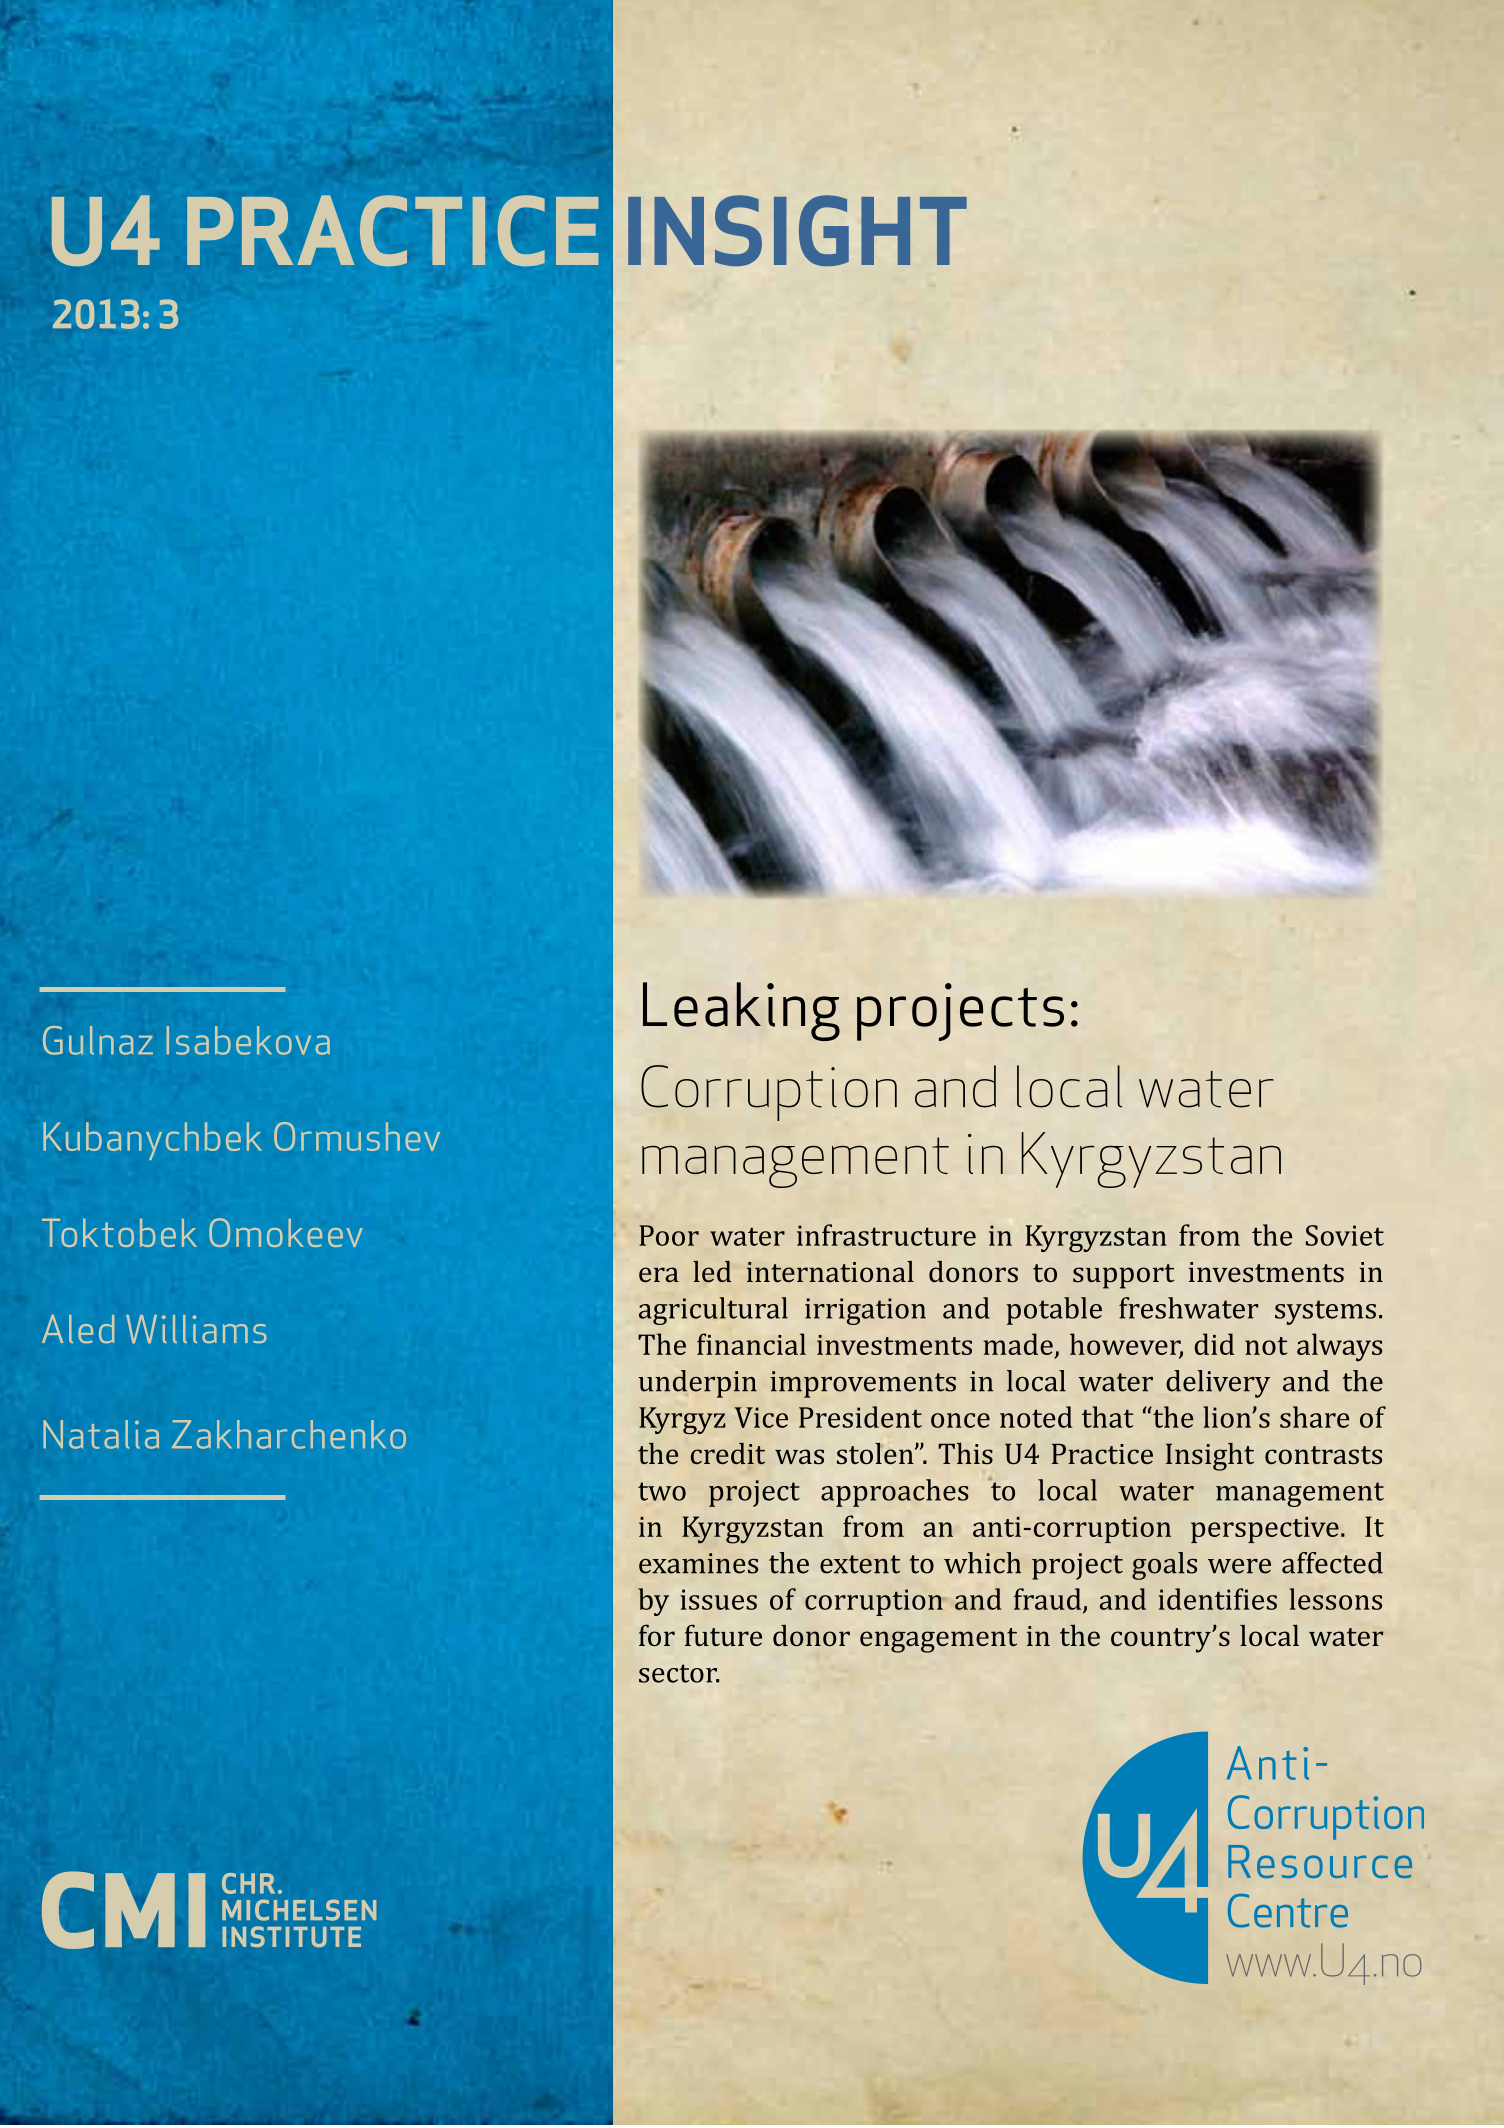 Leaking projects: Corruption and local water management in Kyrgyzstan